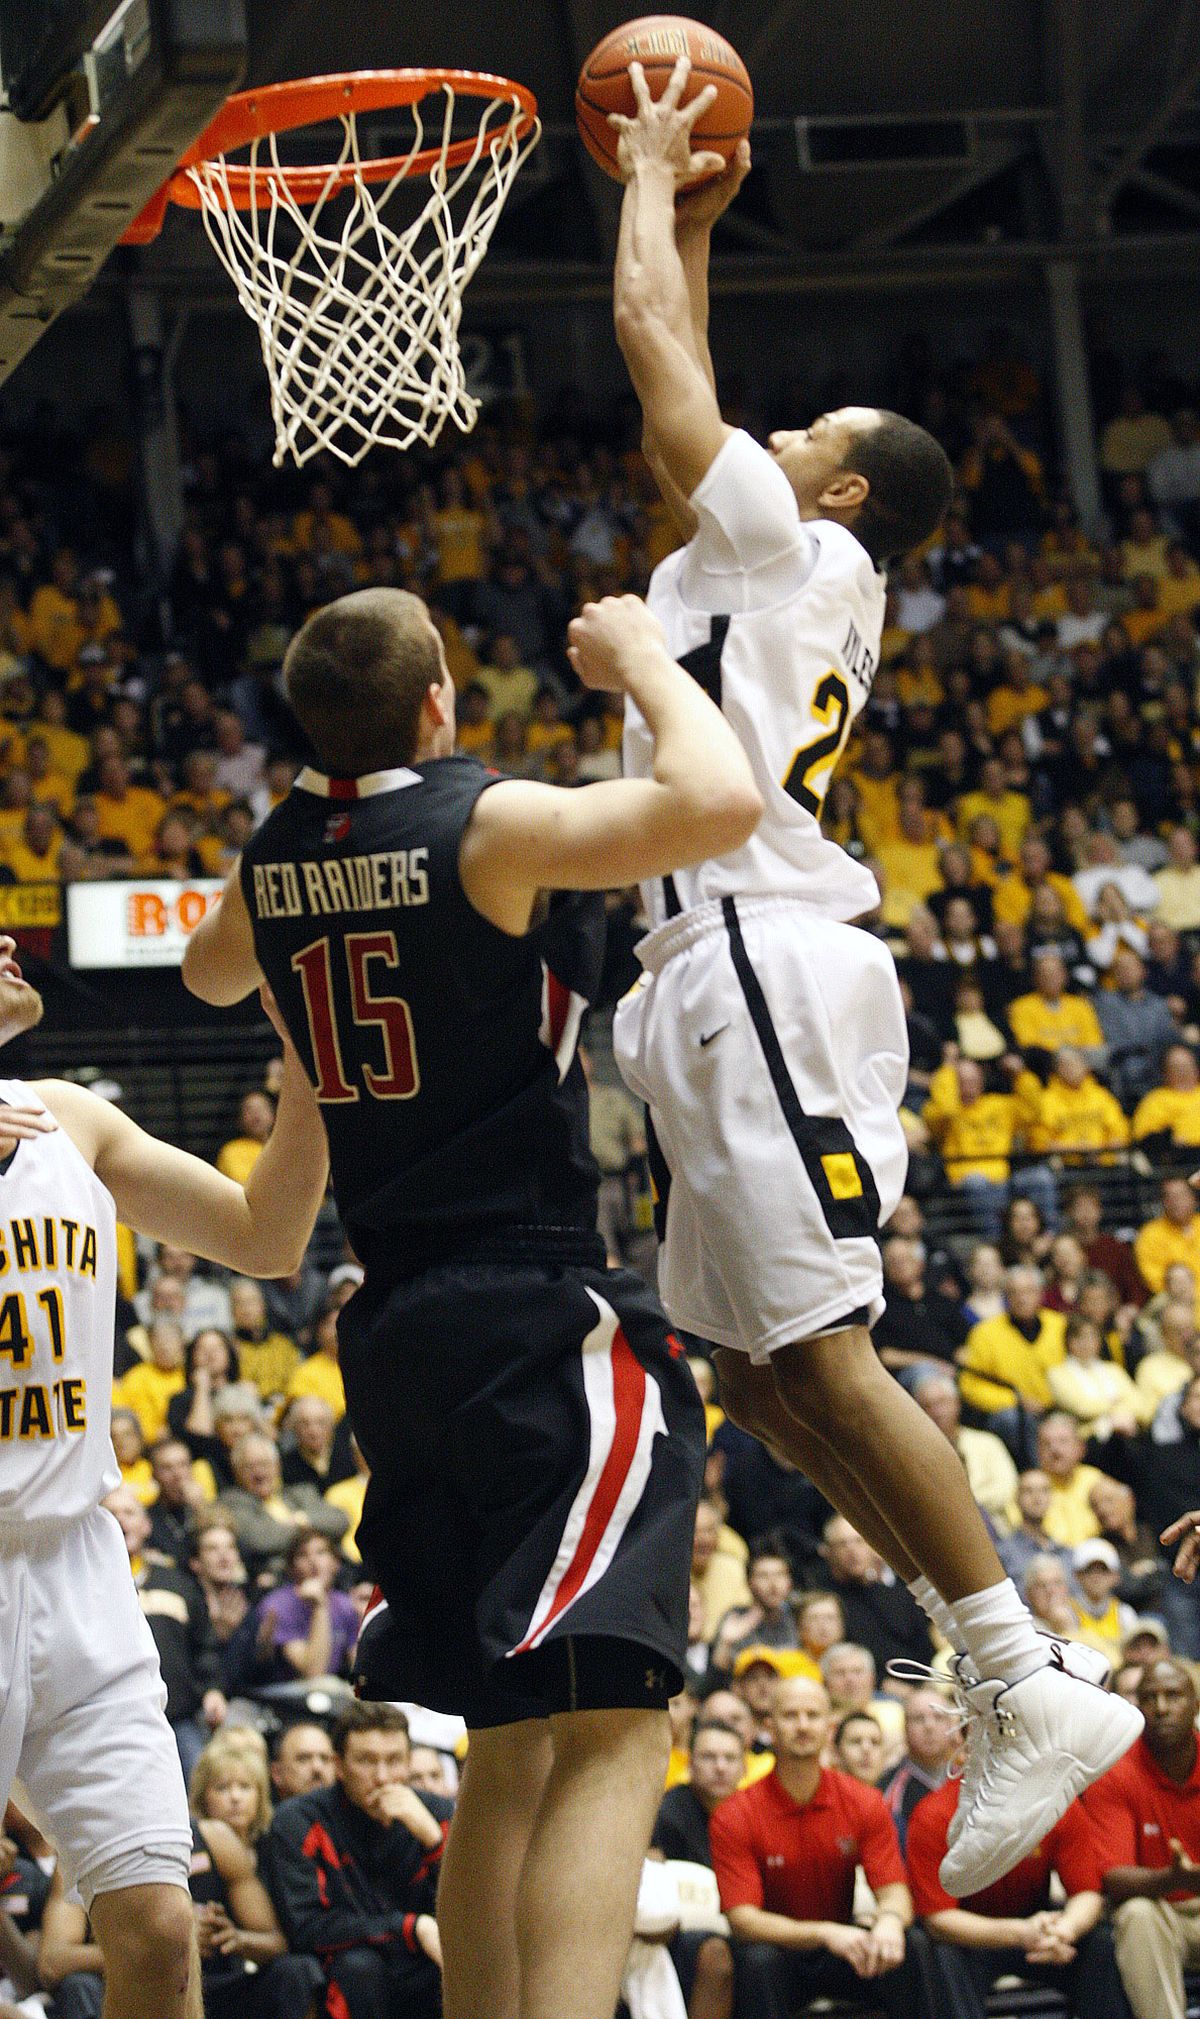 David Kyles’ first-half dunk helped Wichita State to a big halftime lead Dec. 19 as the Shockers knocked Texas Tech from the unbeaten ranks with an 85-83 decision.  (Associated Press)